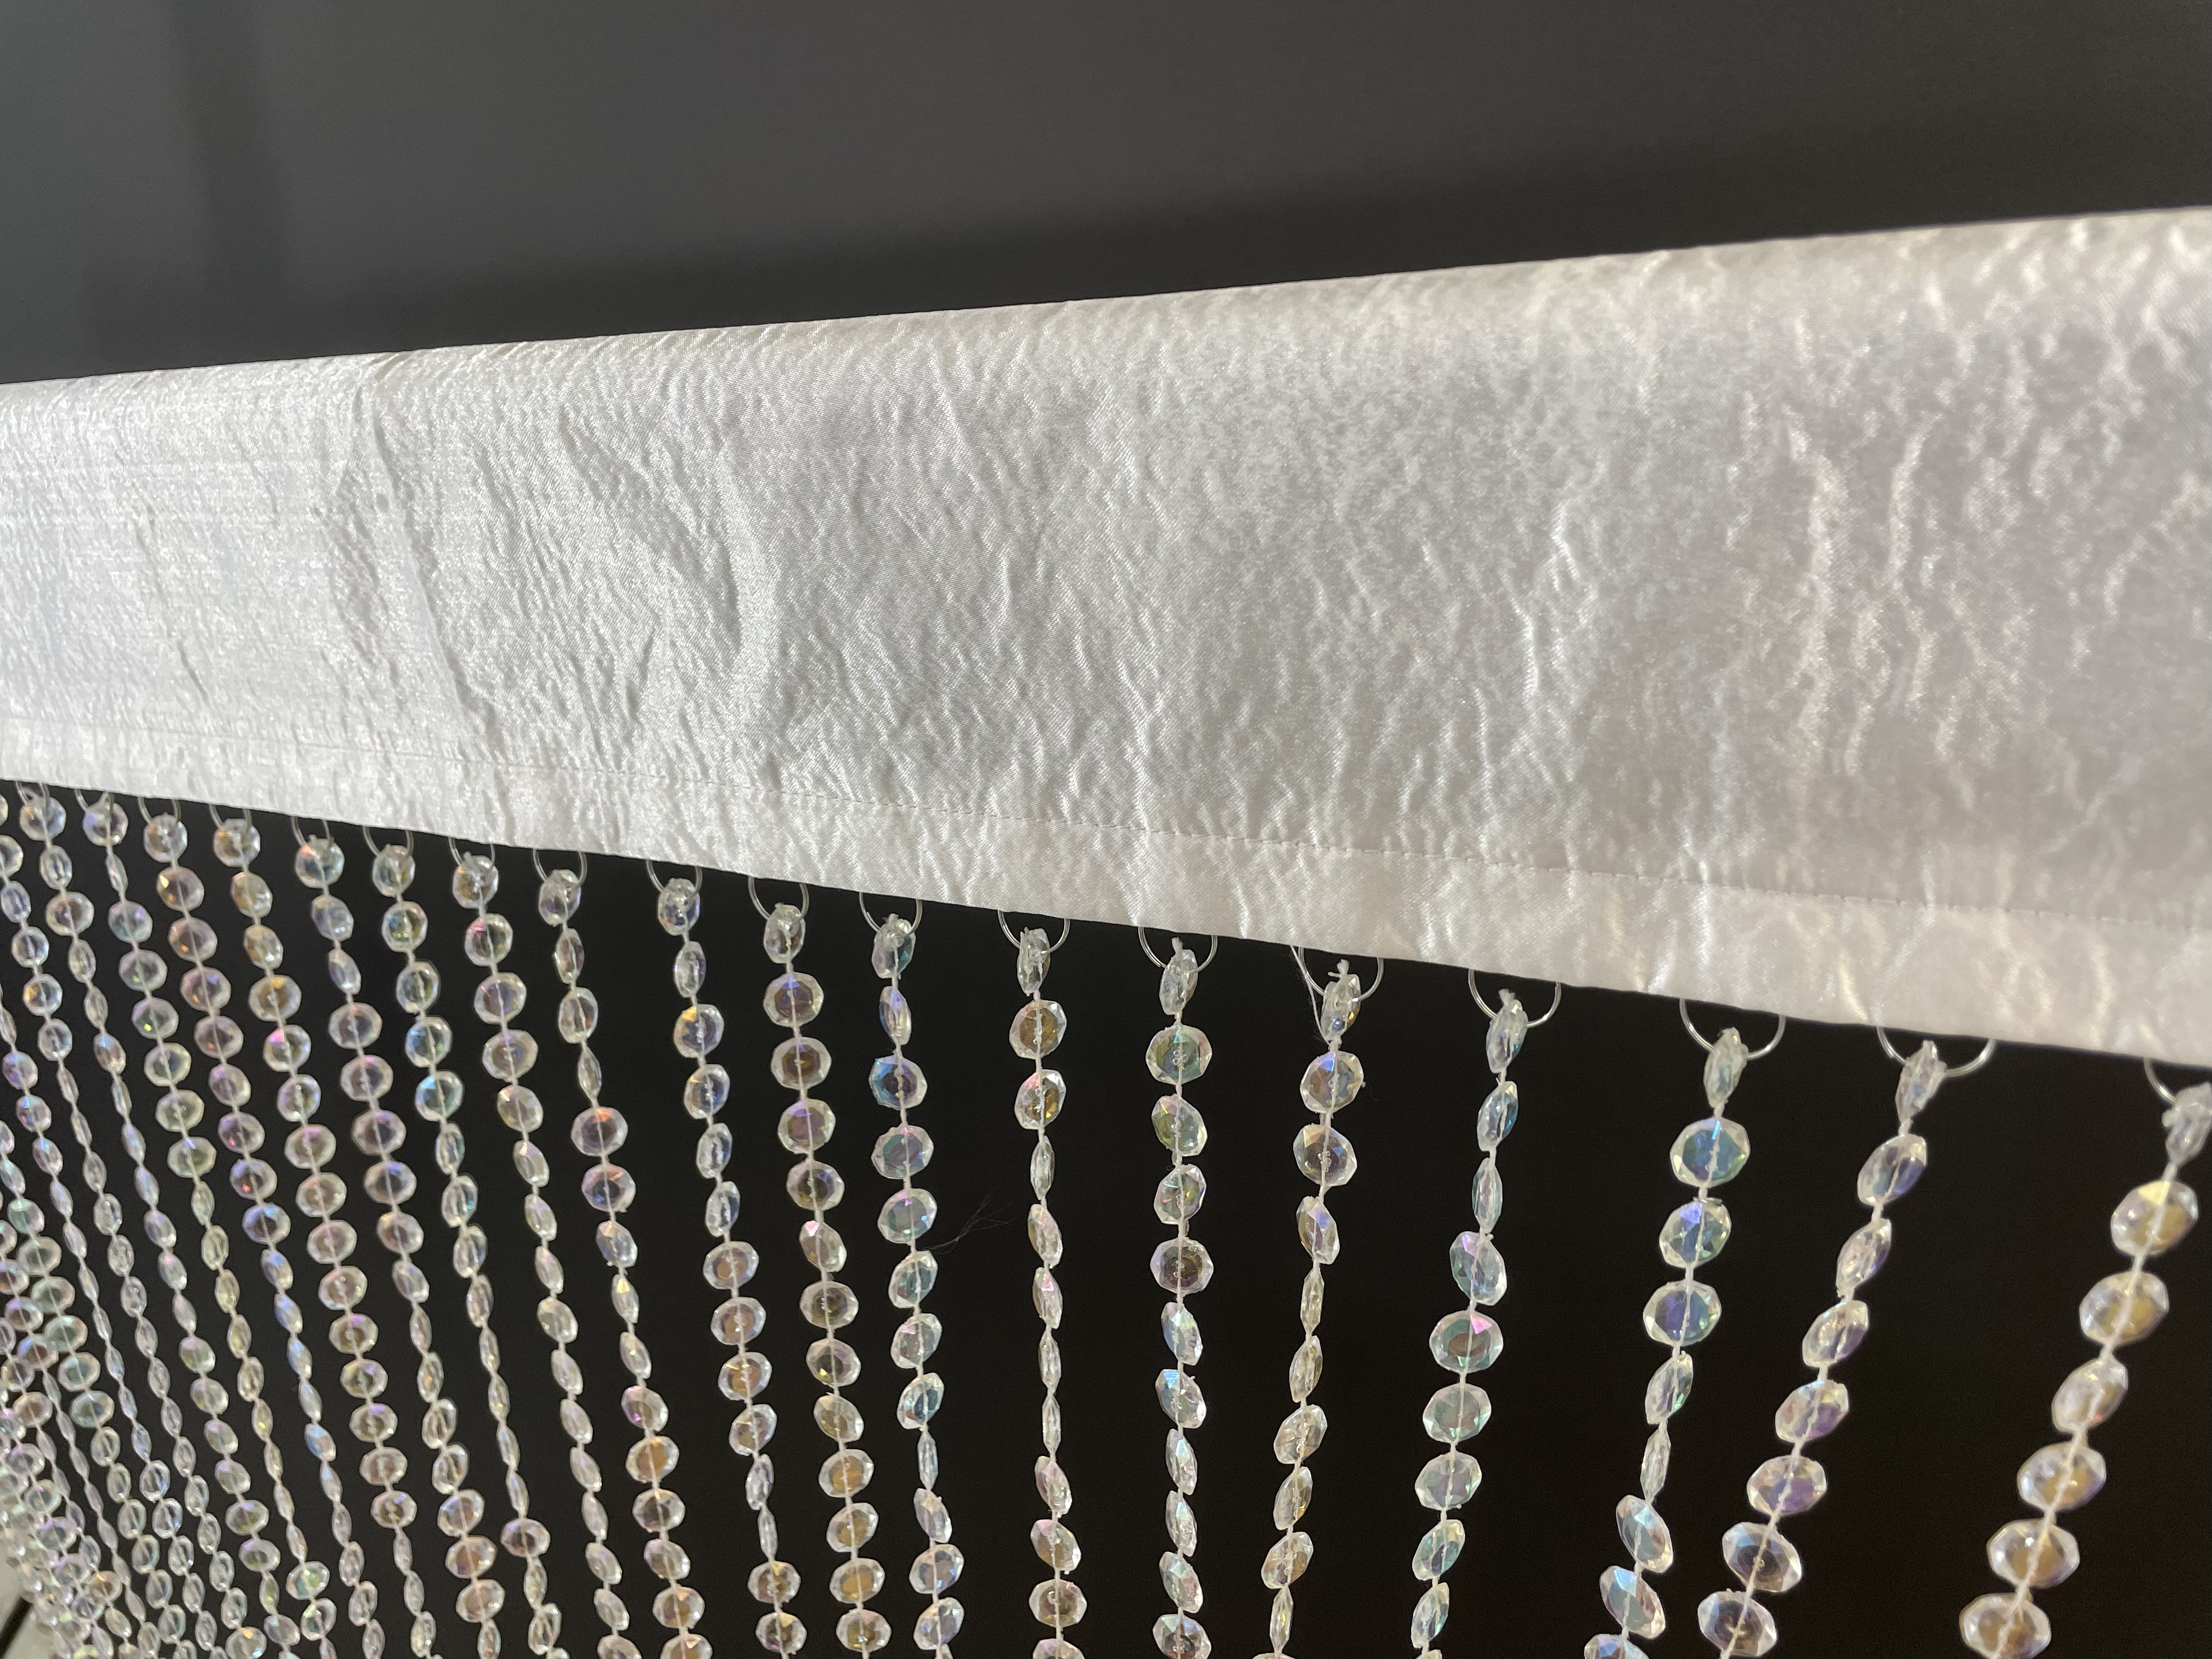 Crystal hanging beads with fabric rod pocket